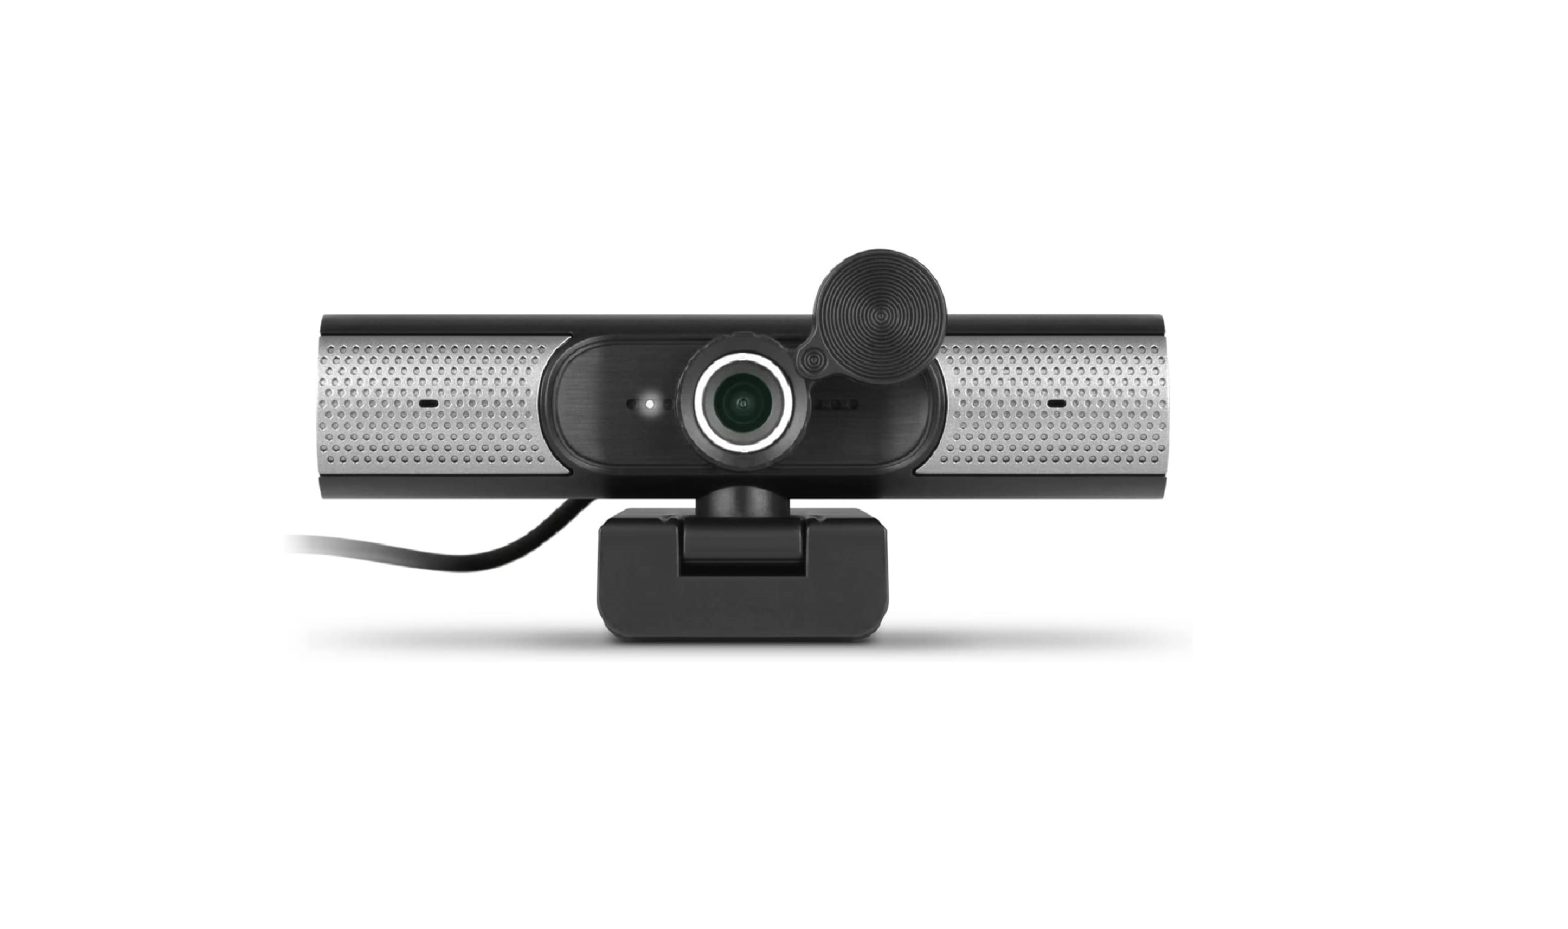 Aluratek HD 1080p Webcam with Built-in Speakers AWCS06F User Guide